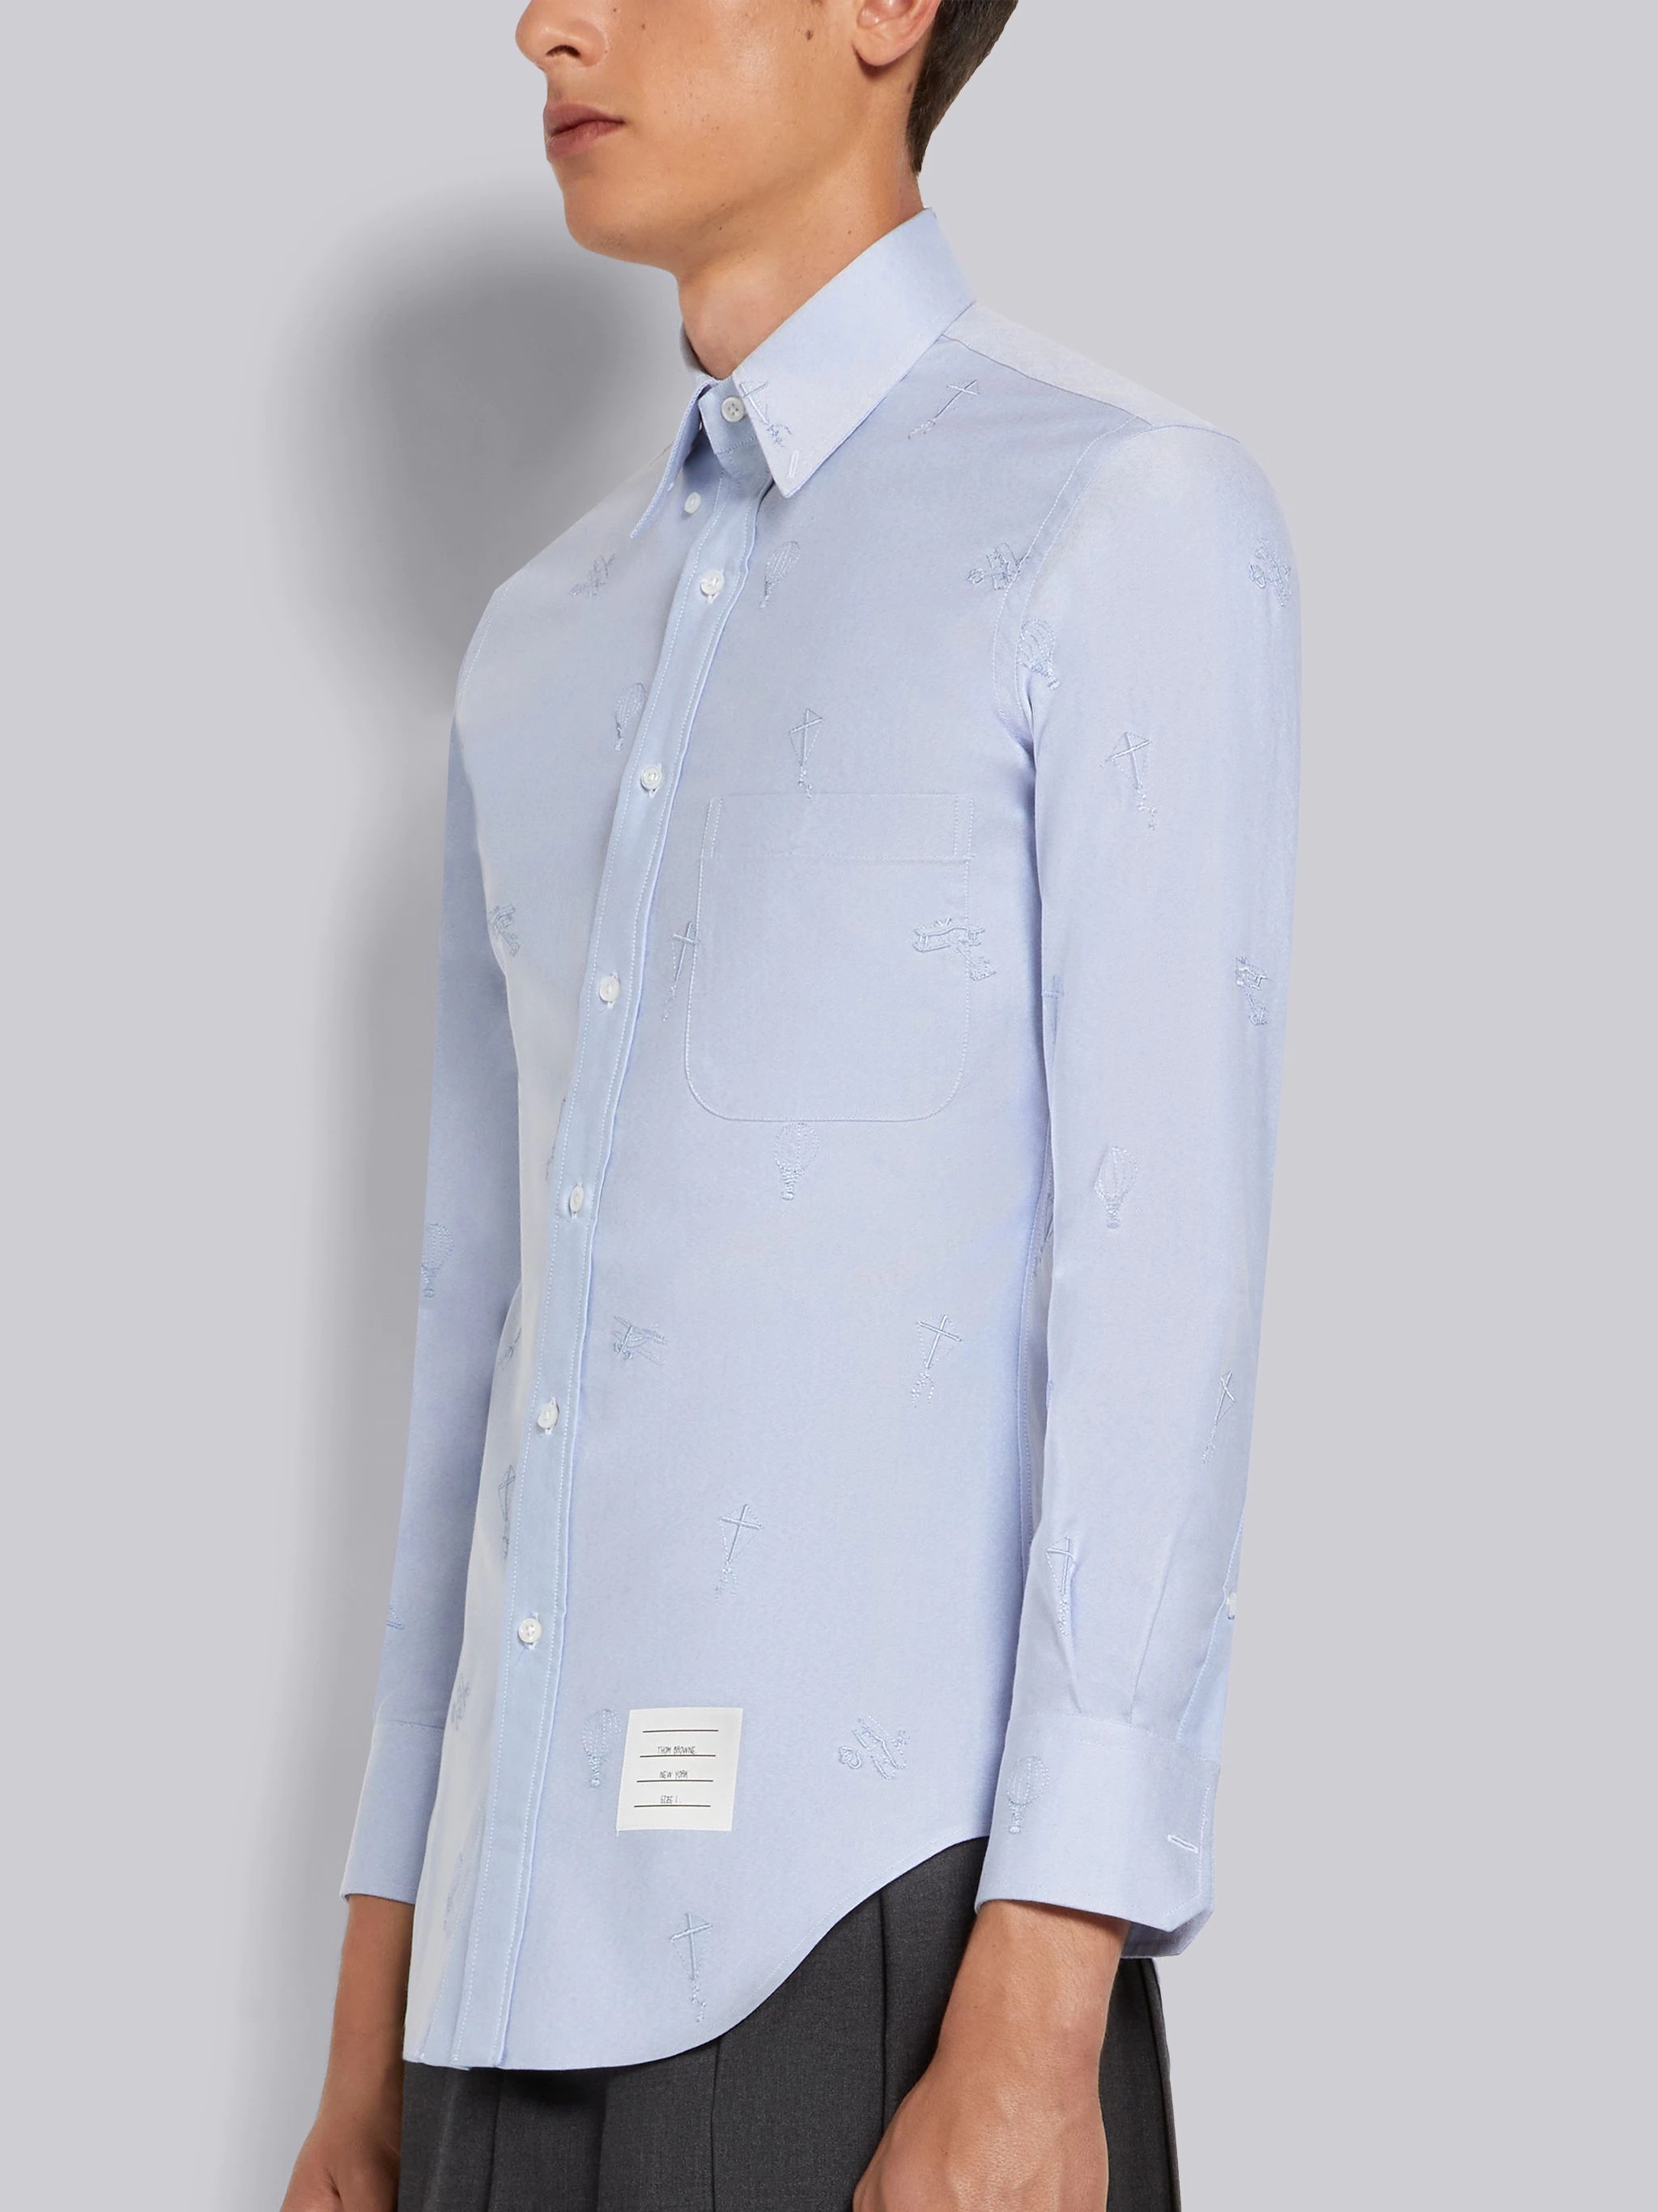 Light Blue Oxford Embroidered Half Drop Sky Icon Classic Fit Shirt - 2